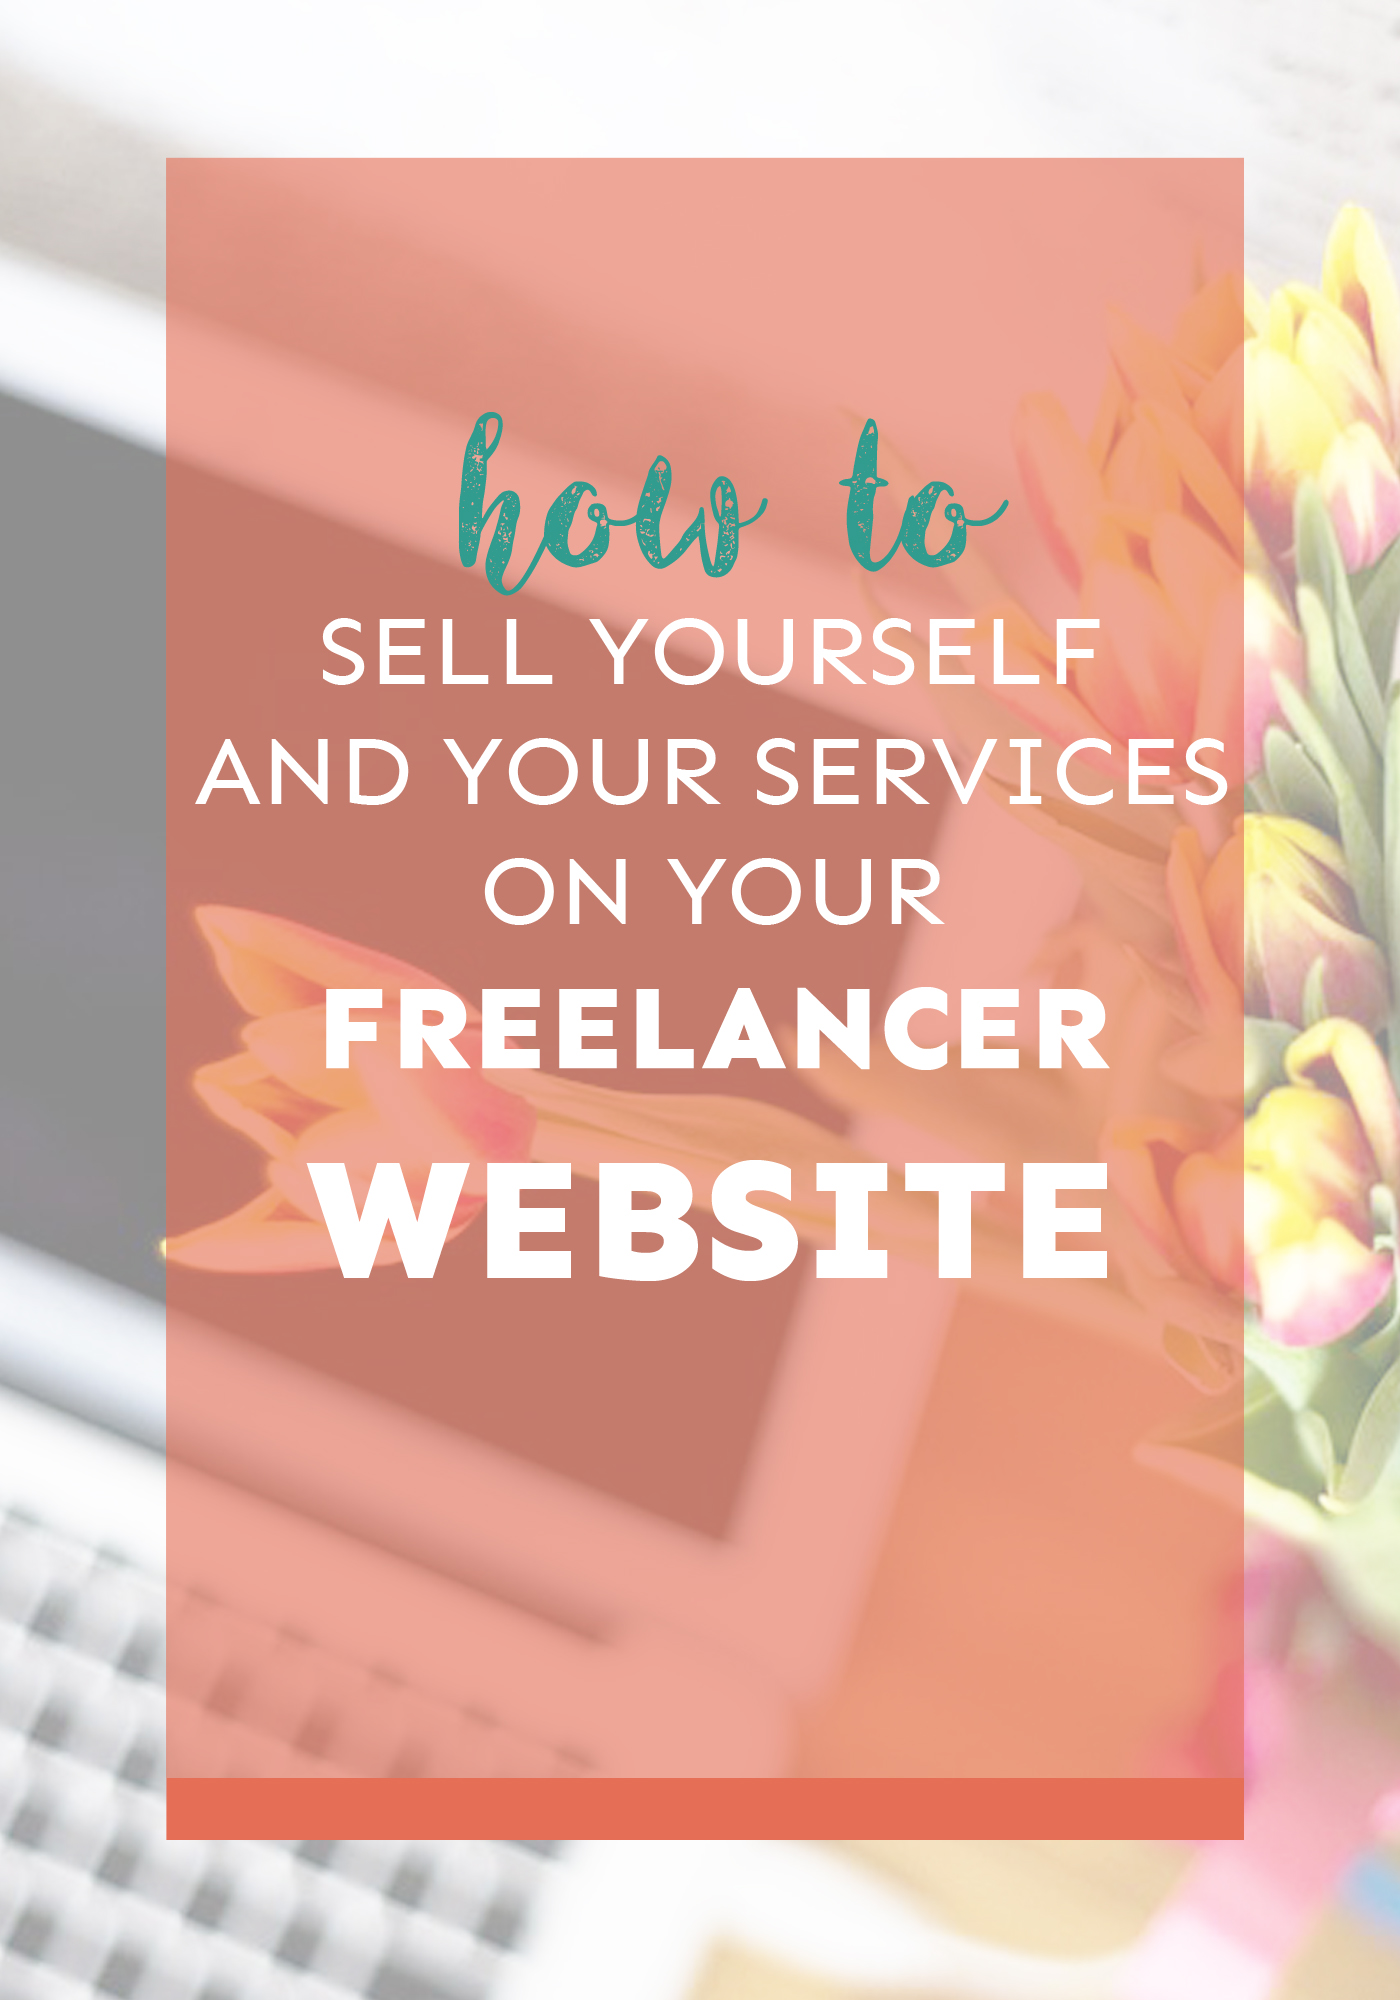 Want to know how to successfully sell yourself and your services on your freelancer website? These tips and tricks will help!